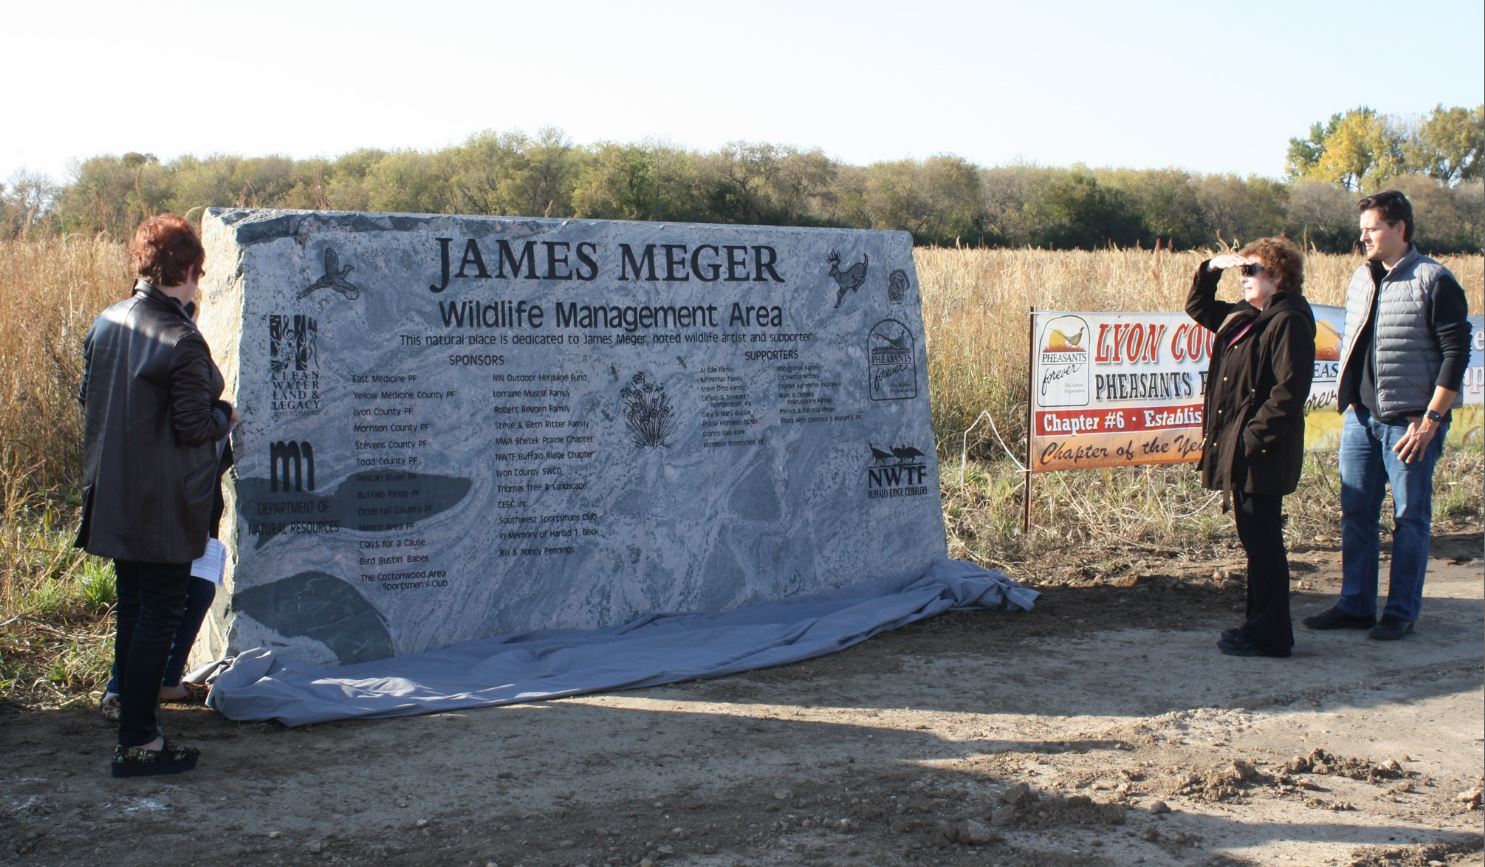 James Meger's family admire the stone monolith erected on the WMA's east side.